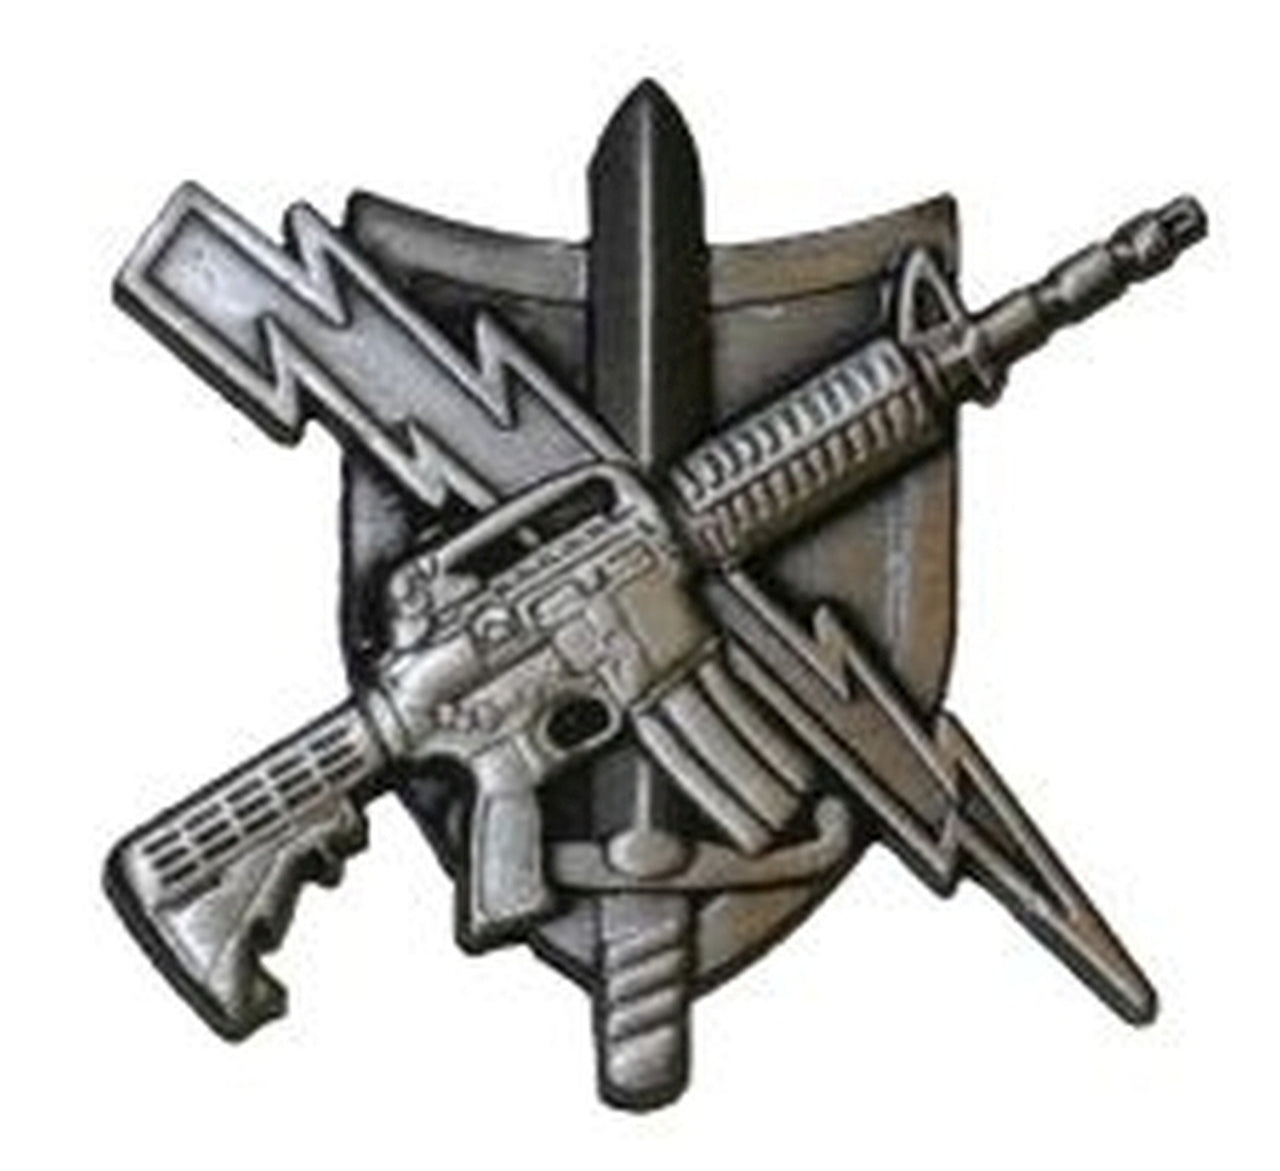 Center Mass Tactical Patrol Officer Qualification Pin